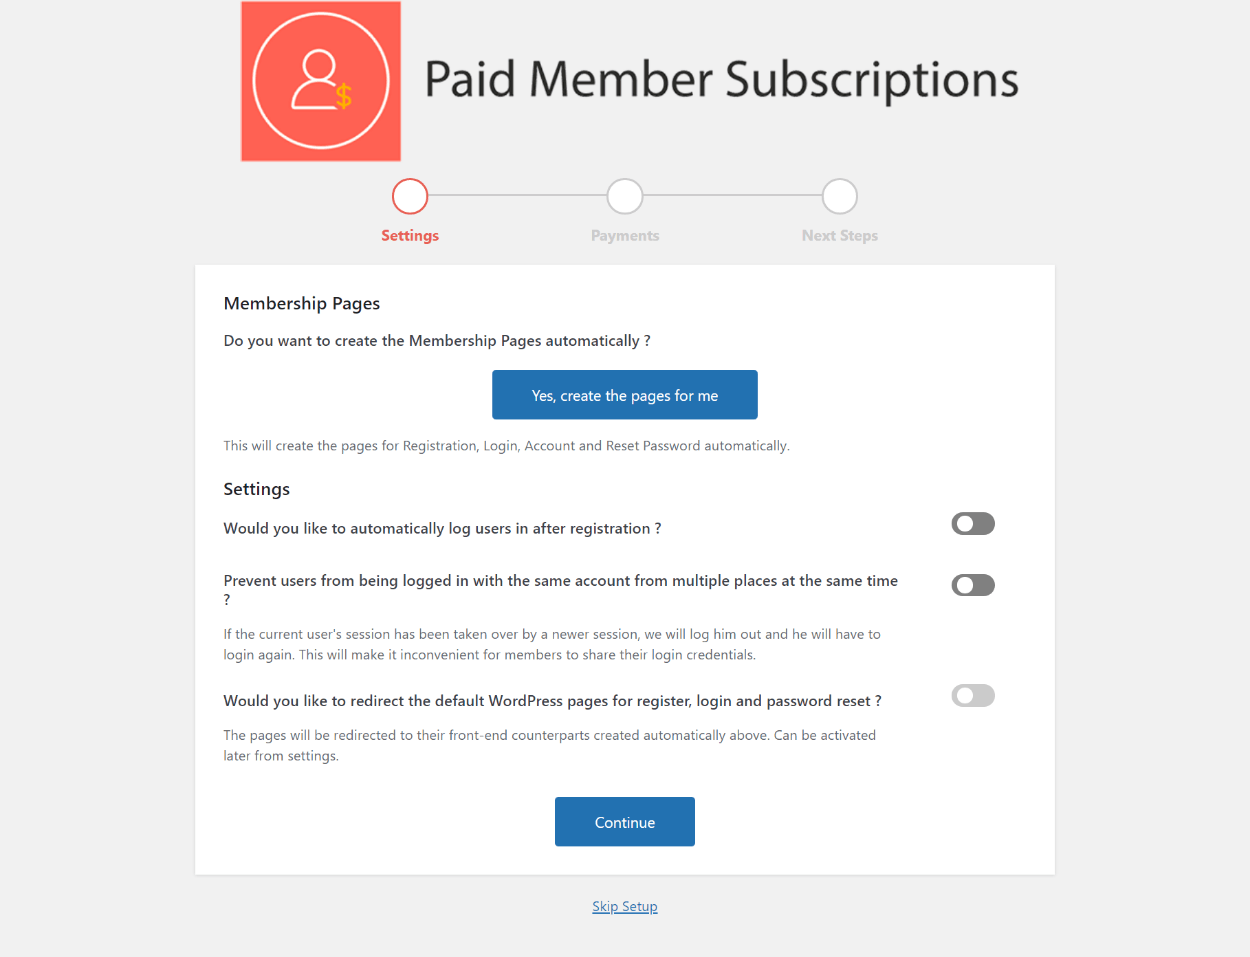 Paid Member Subscriptions setup wizard